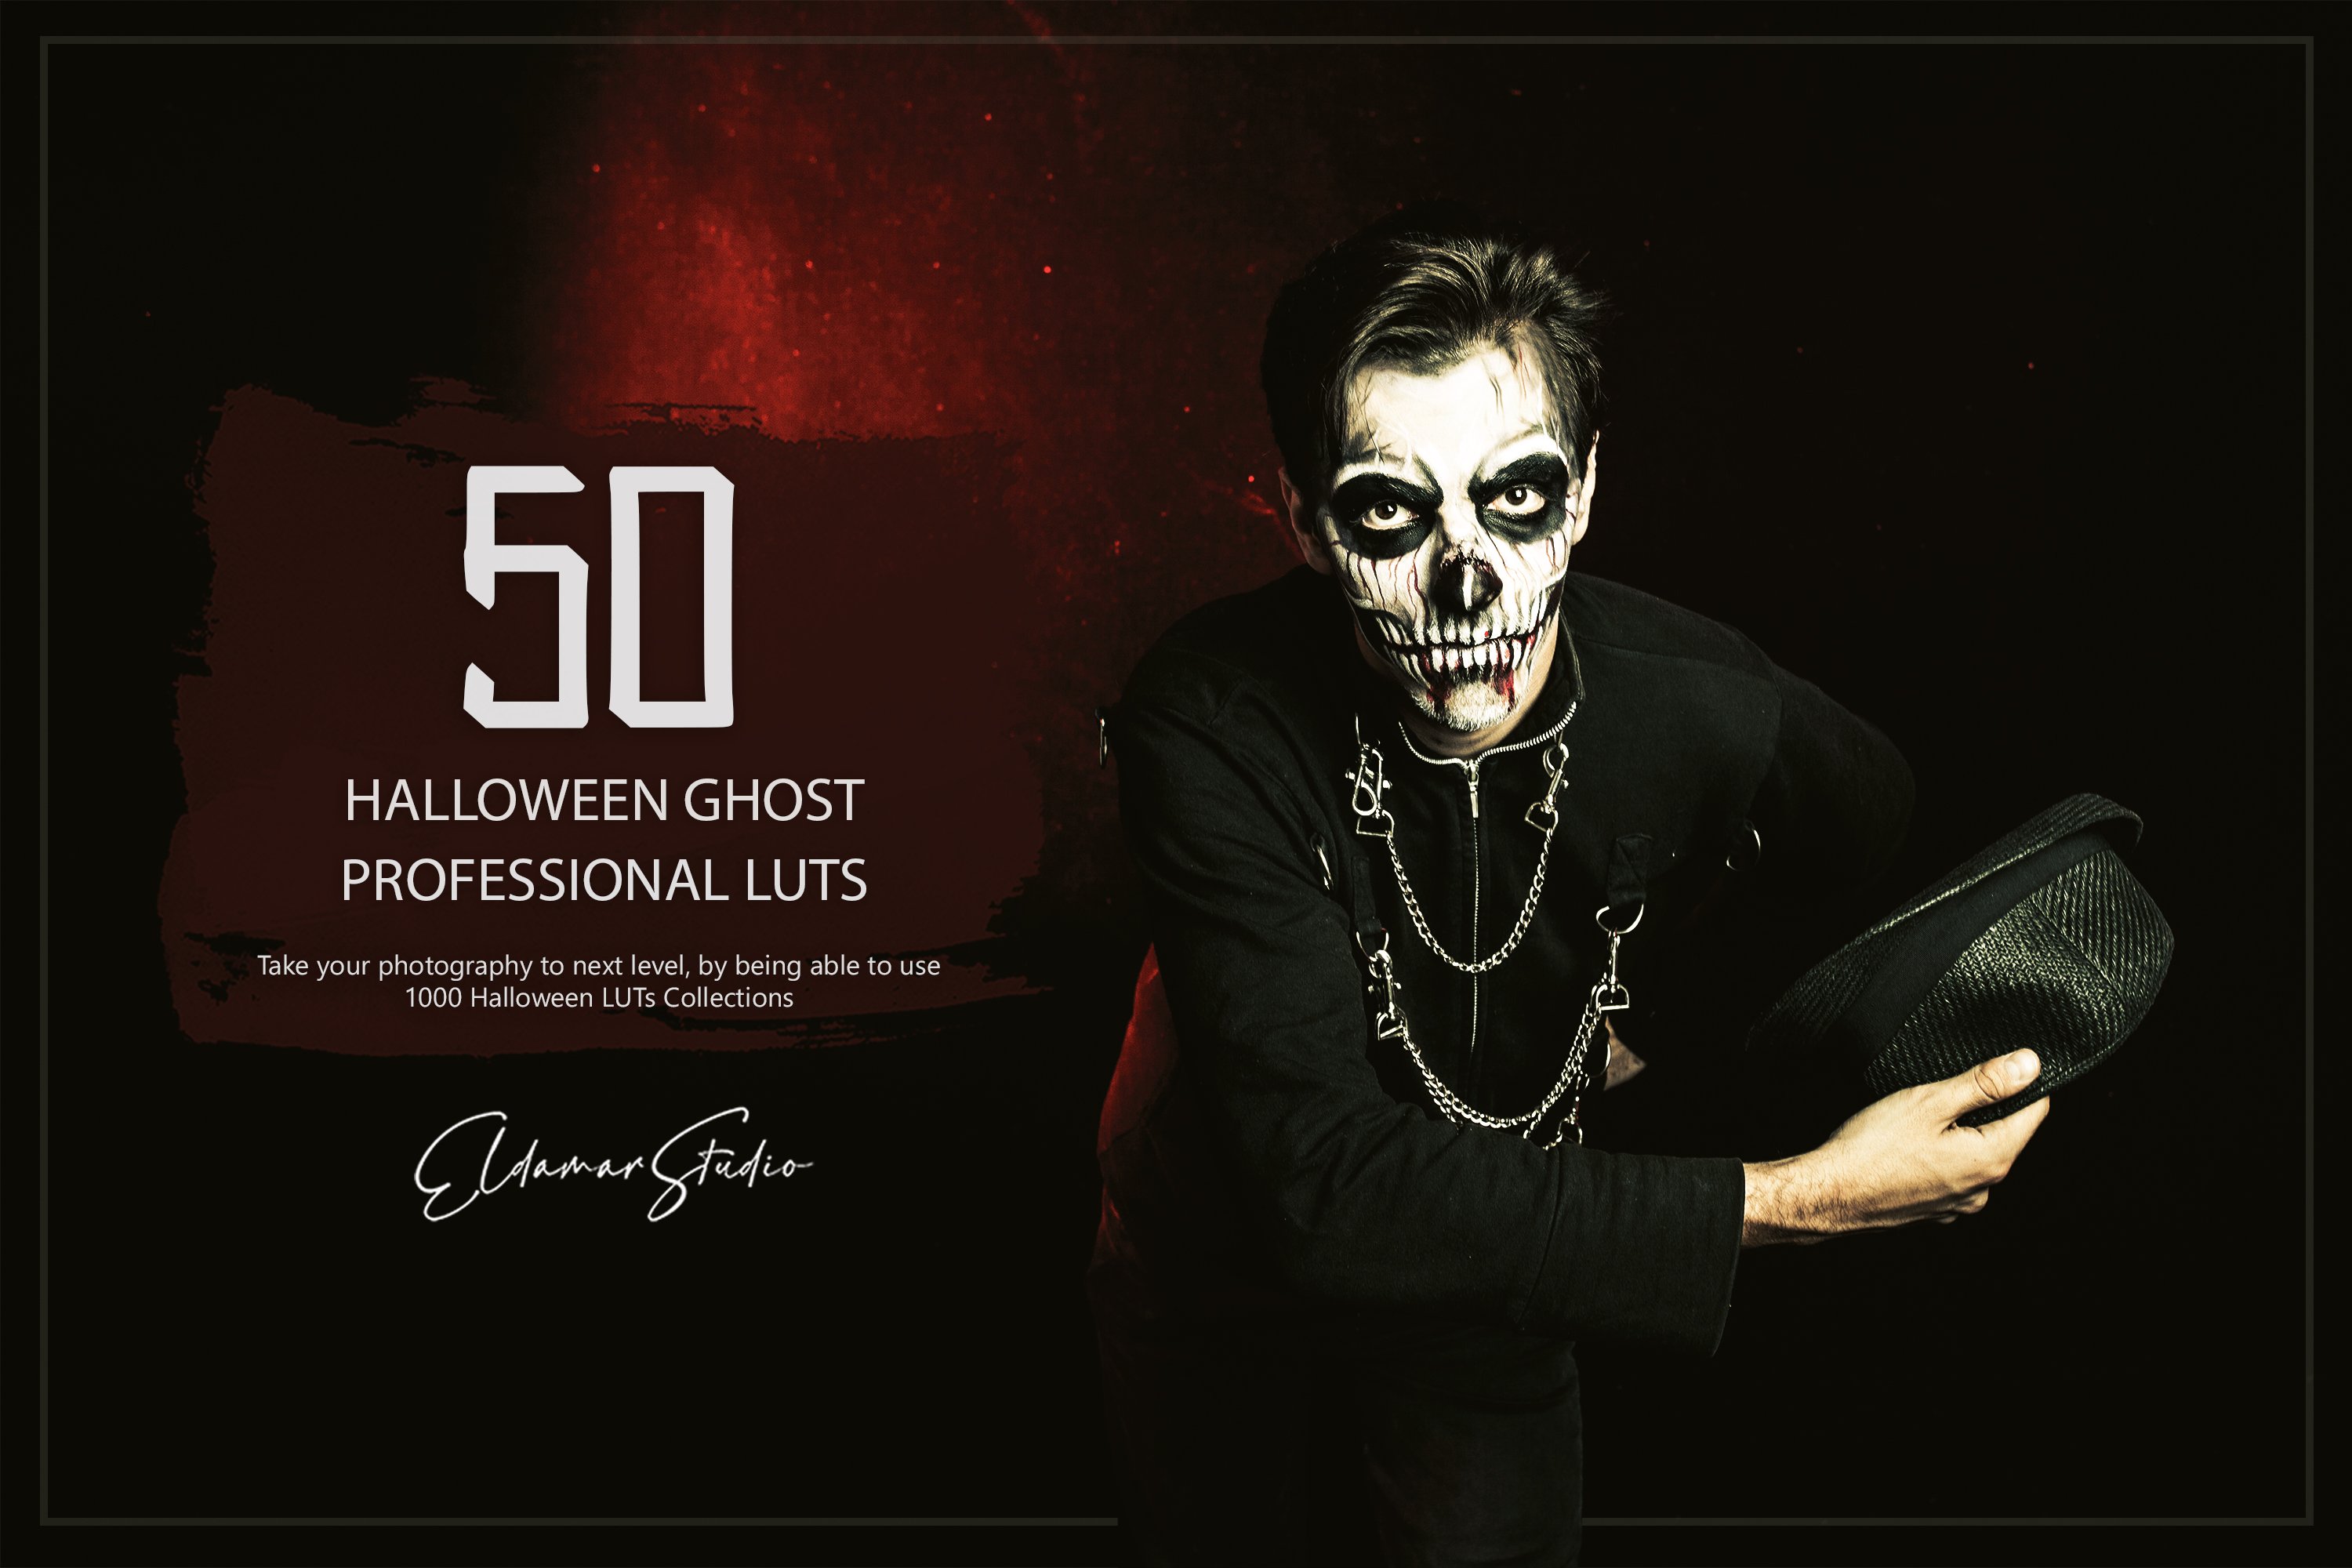 50 Halloween Ghost LUTs and Presetscover image.